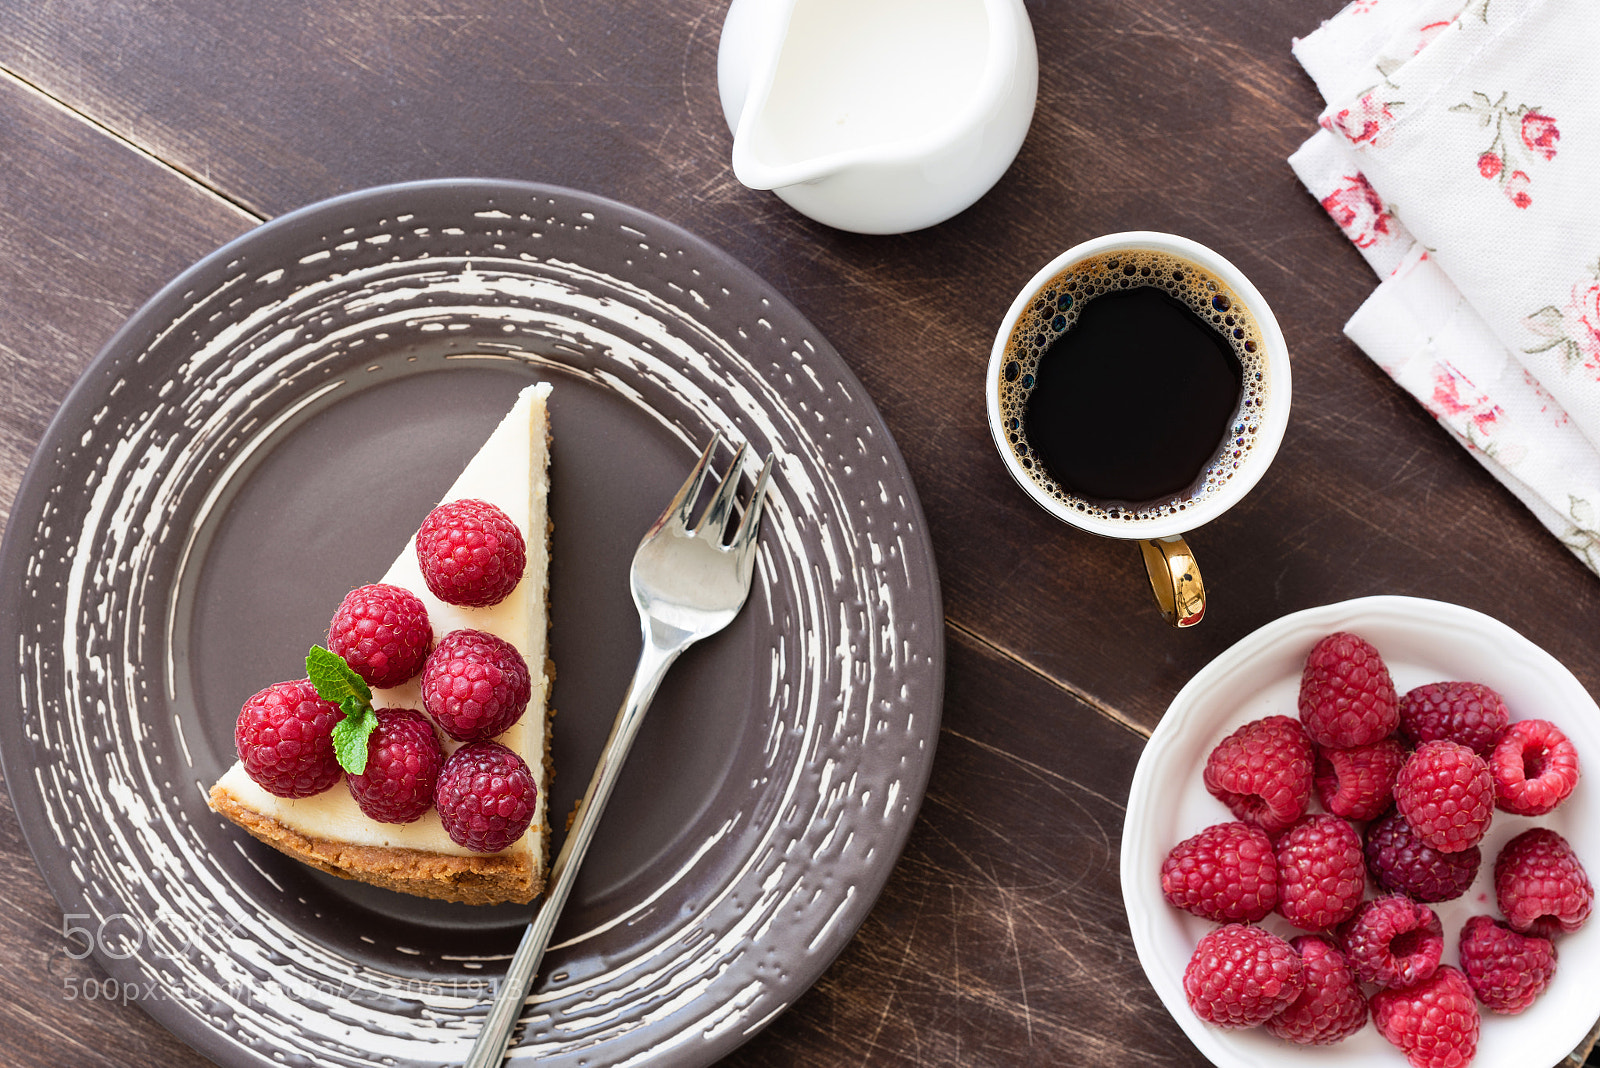 Nikon D810 sample photo. Slice of cheesecake with photography